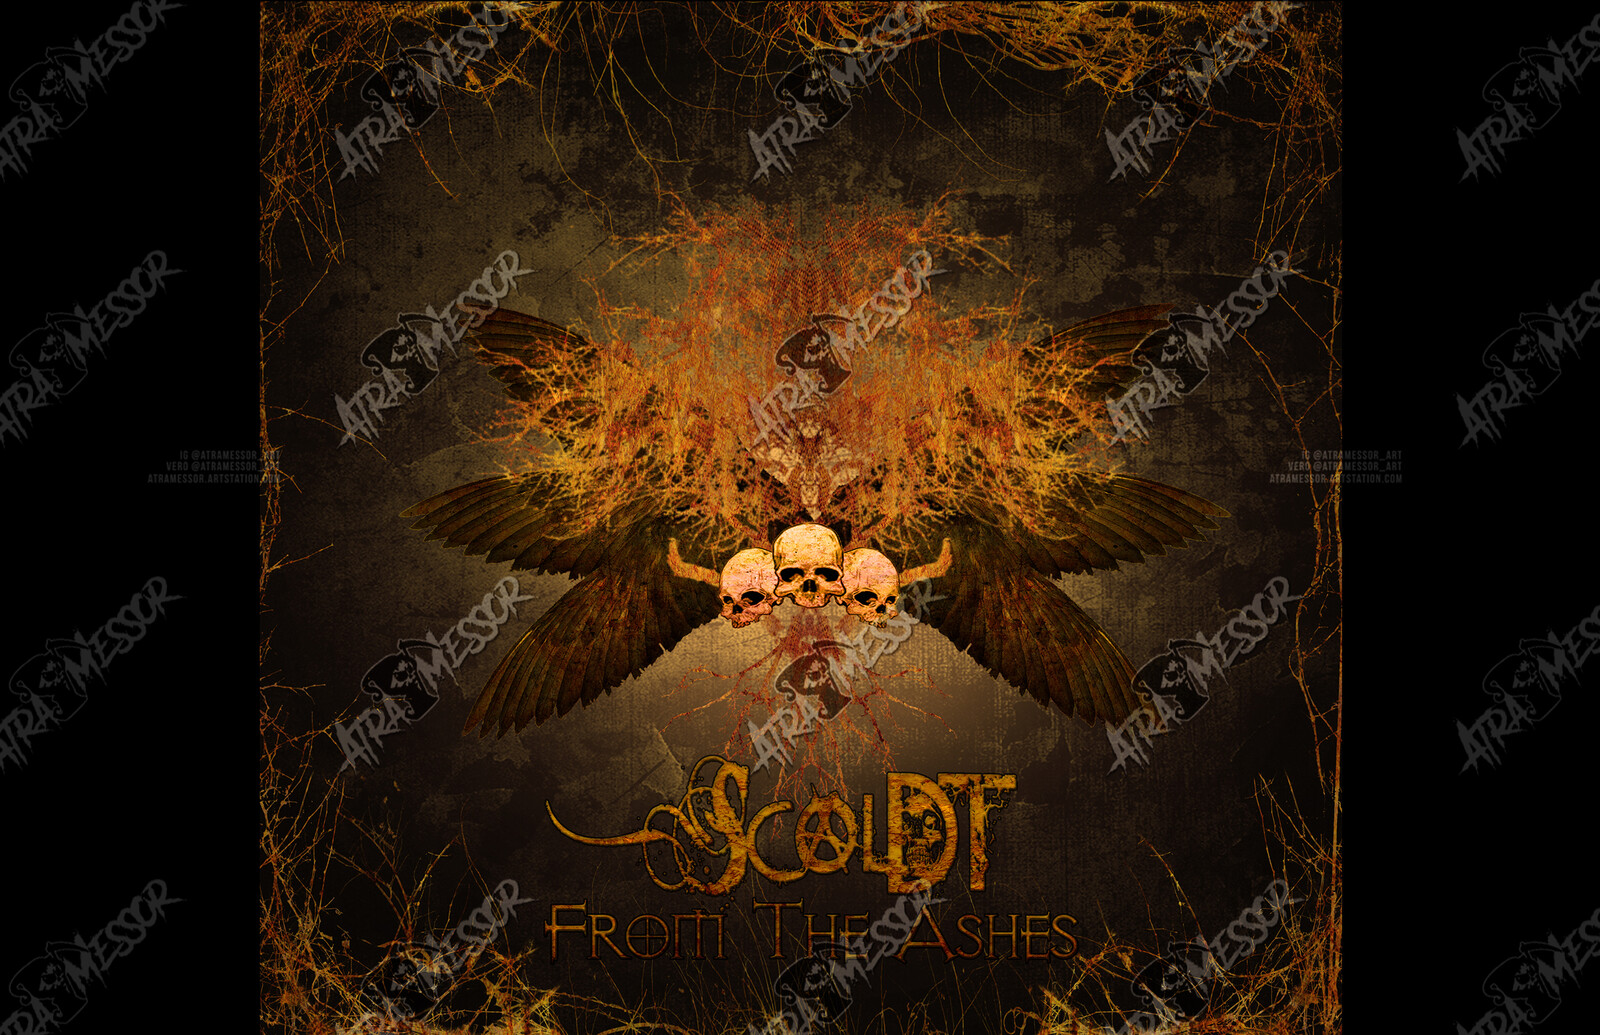 Scoldt From the Ashes Album Art